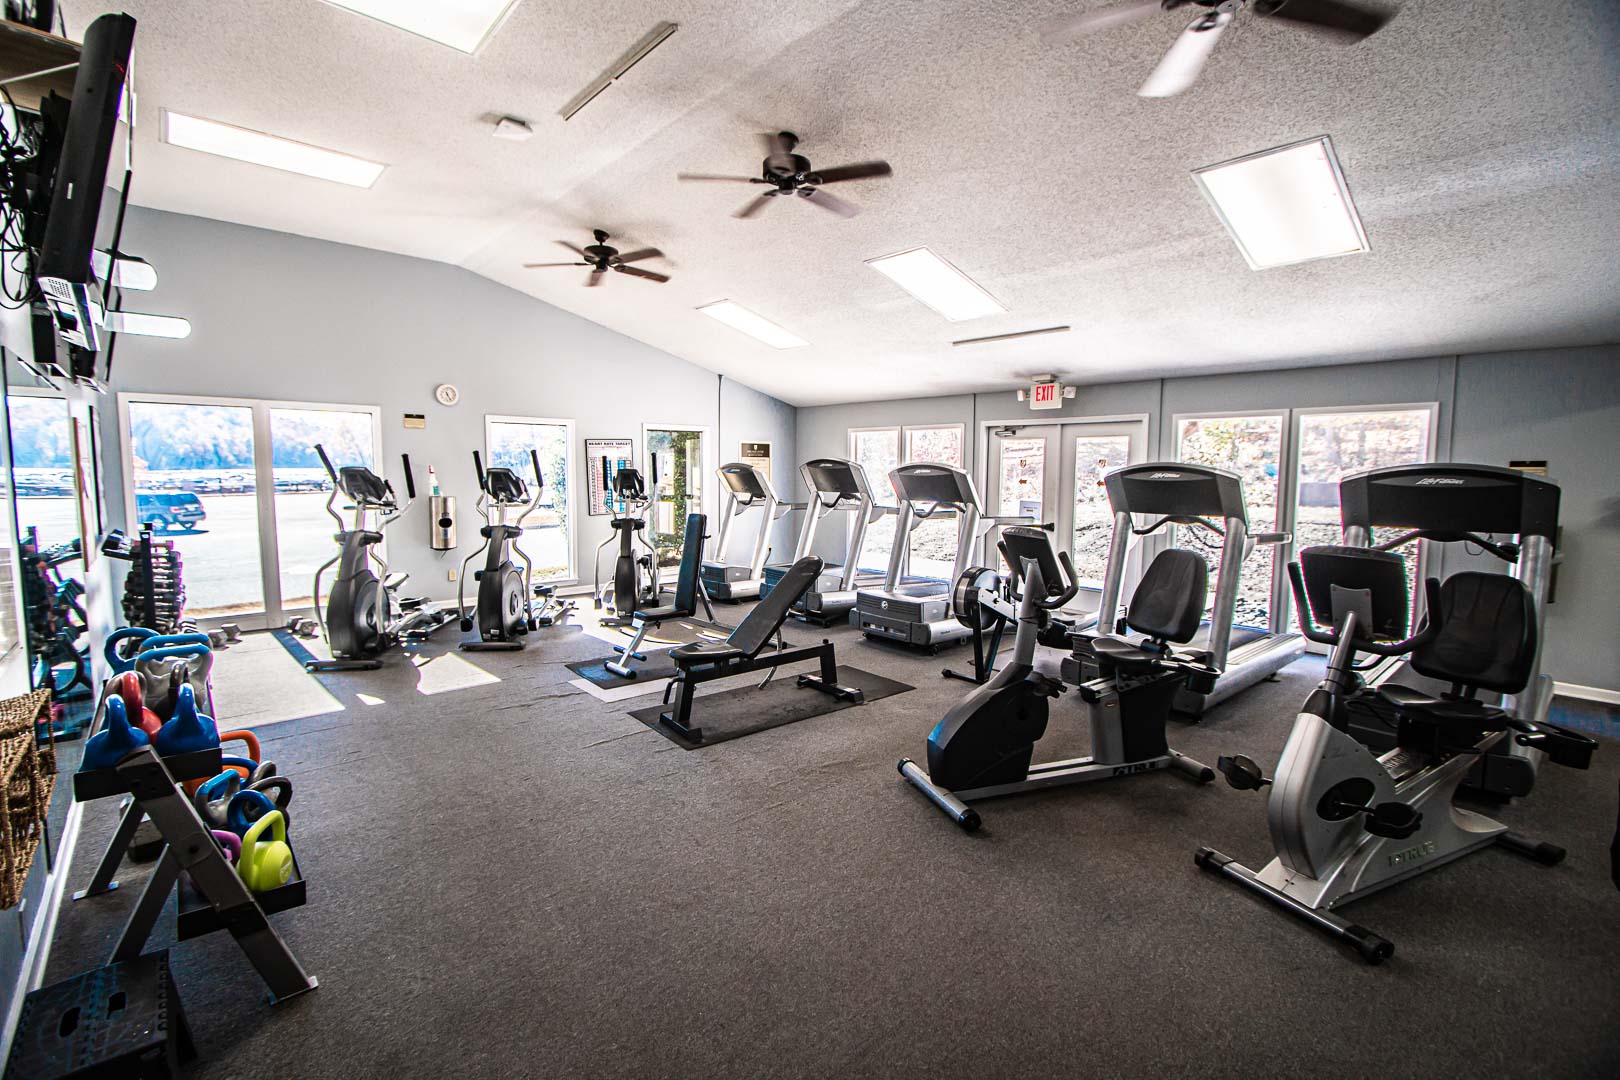 The spacious exercise room at VRI's Fairways of the Mountains in North Carolina.